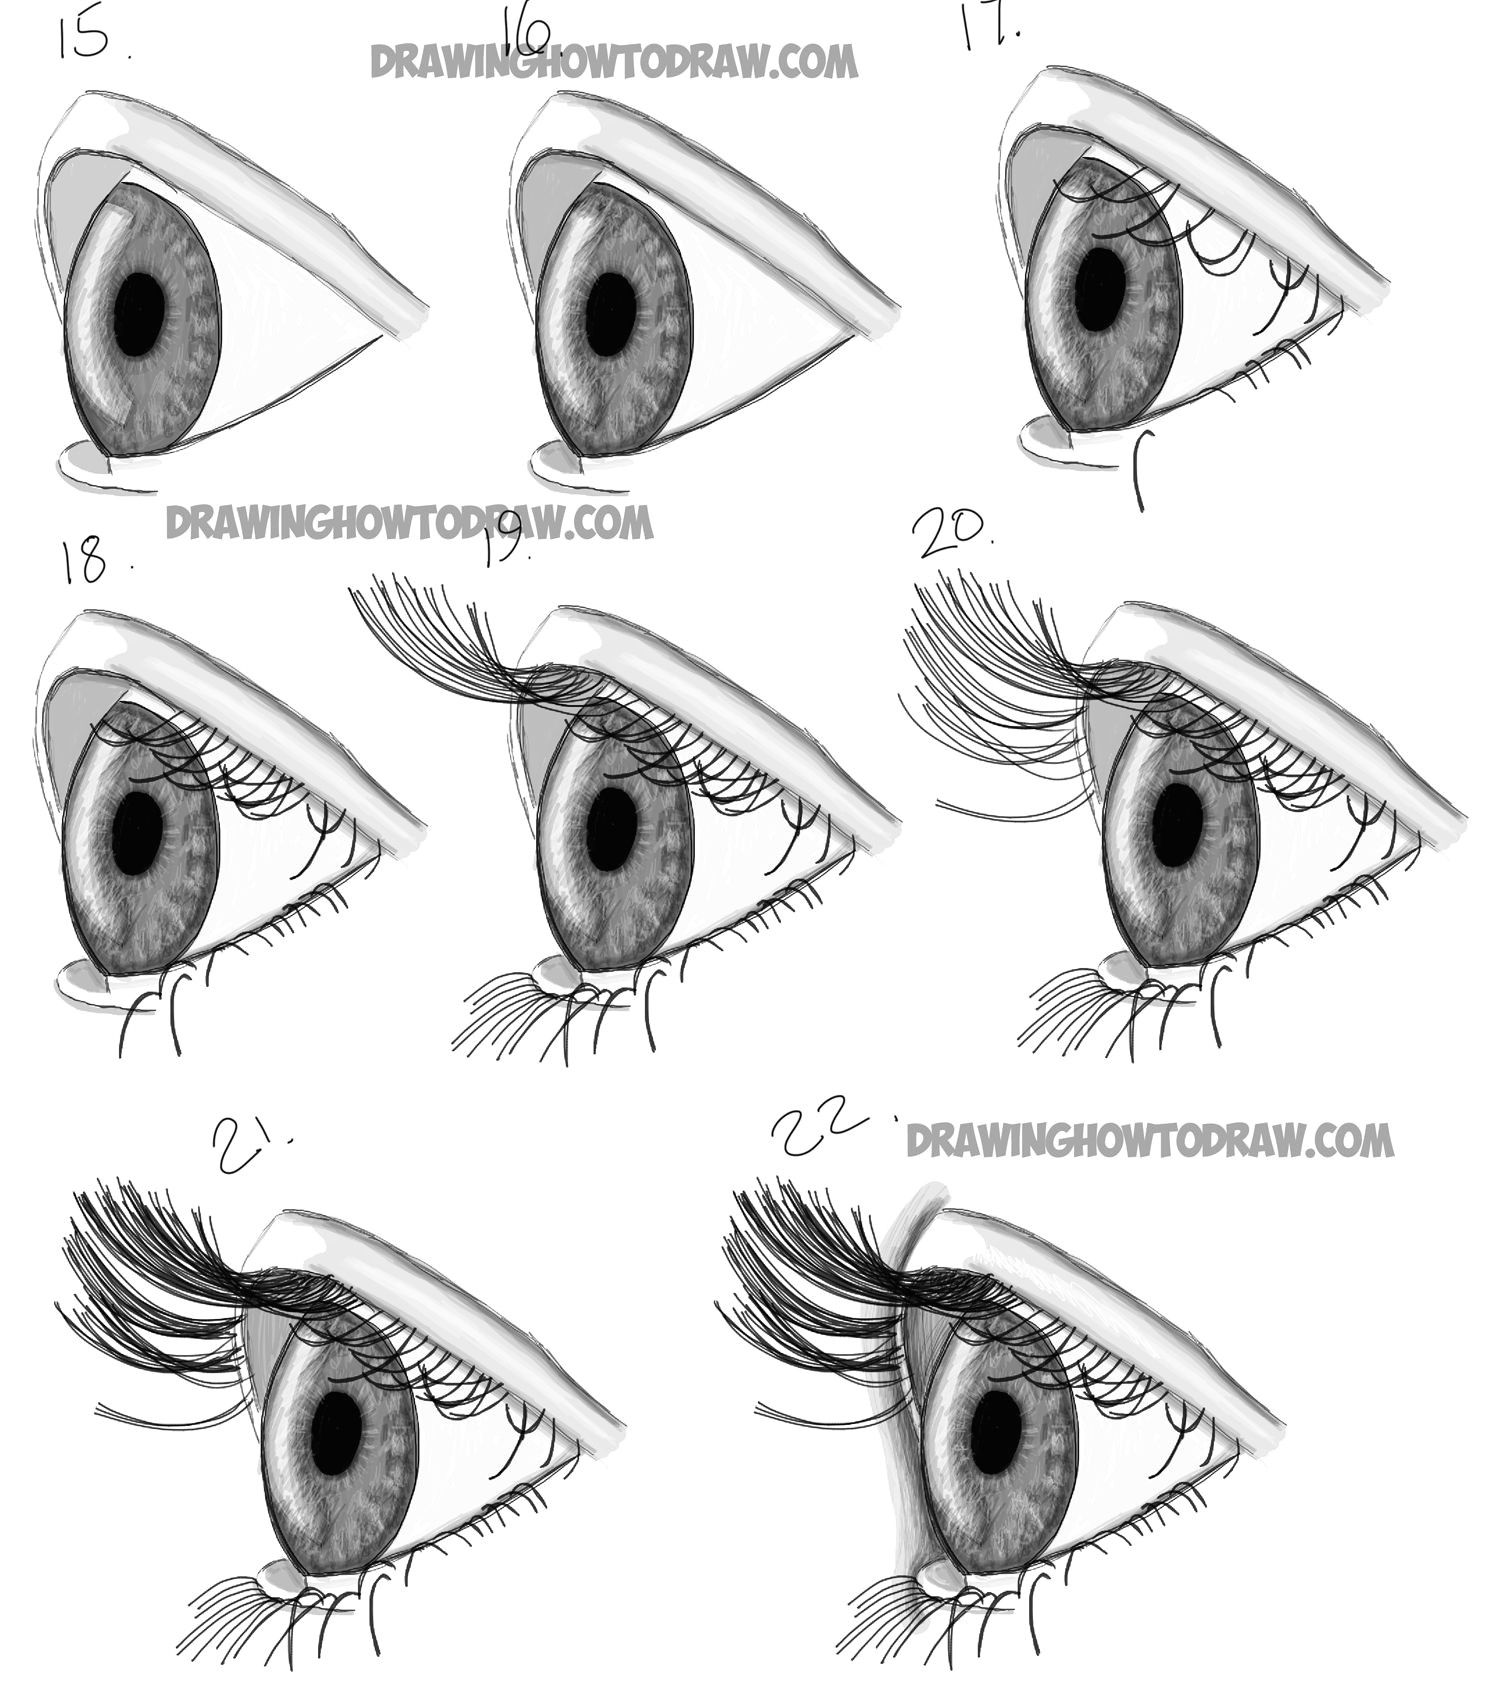 Drawing Eye Reference How to Draw Realistic Eyes From the Side Profile View Step by Step